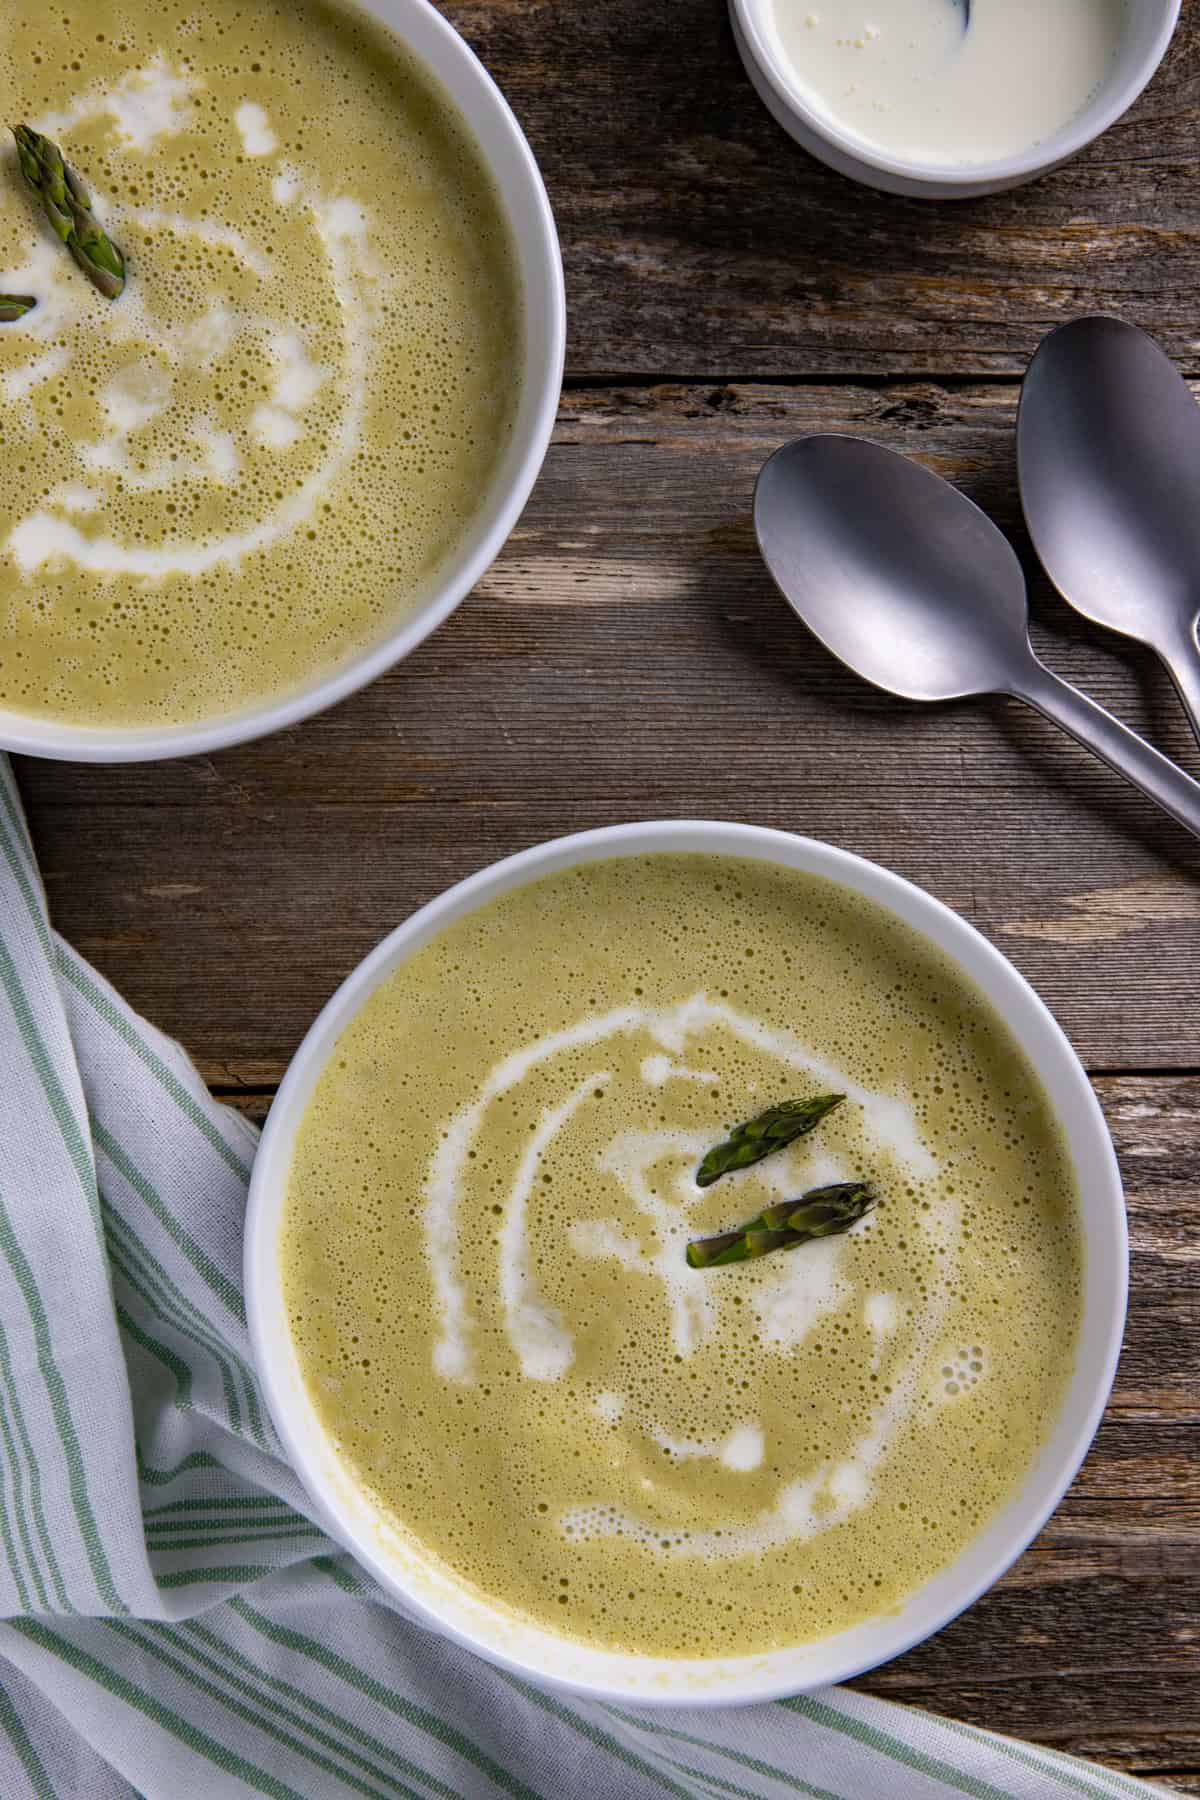 Two white bowls filled with soup garnished with two fresh asparagus tips and a swirl of heavy cream.